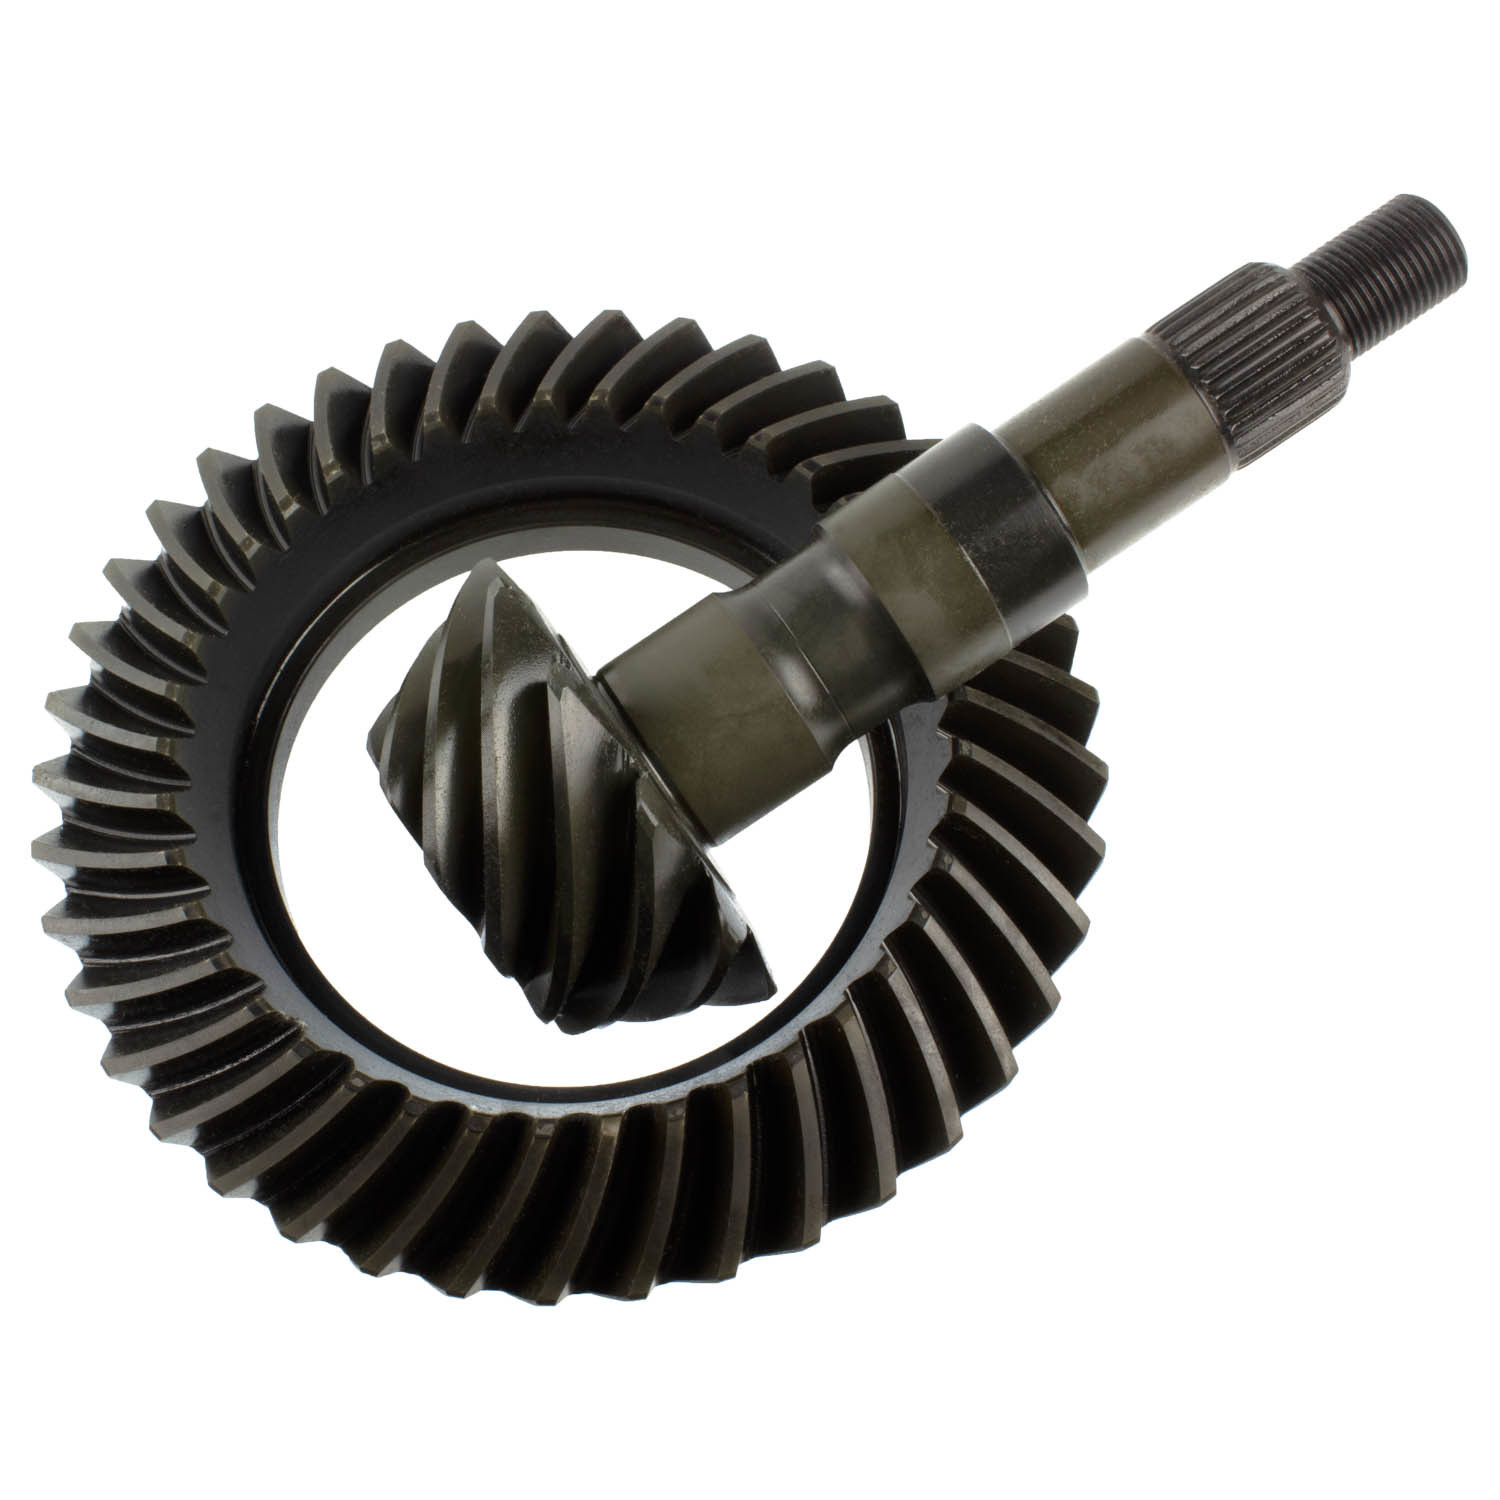 Richmond Gear GM85373 - Ring and Pinion, Excel, 3.73 Ratio, 30 Spline Pinion, 3 Series, 8.5 in / 8.6 in, GM 10-Bolt, Kit